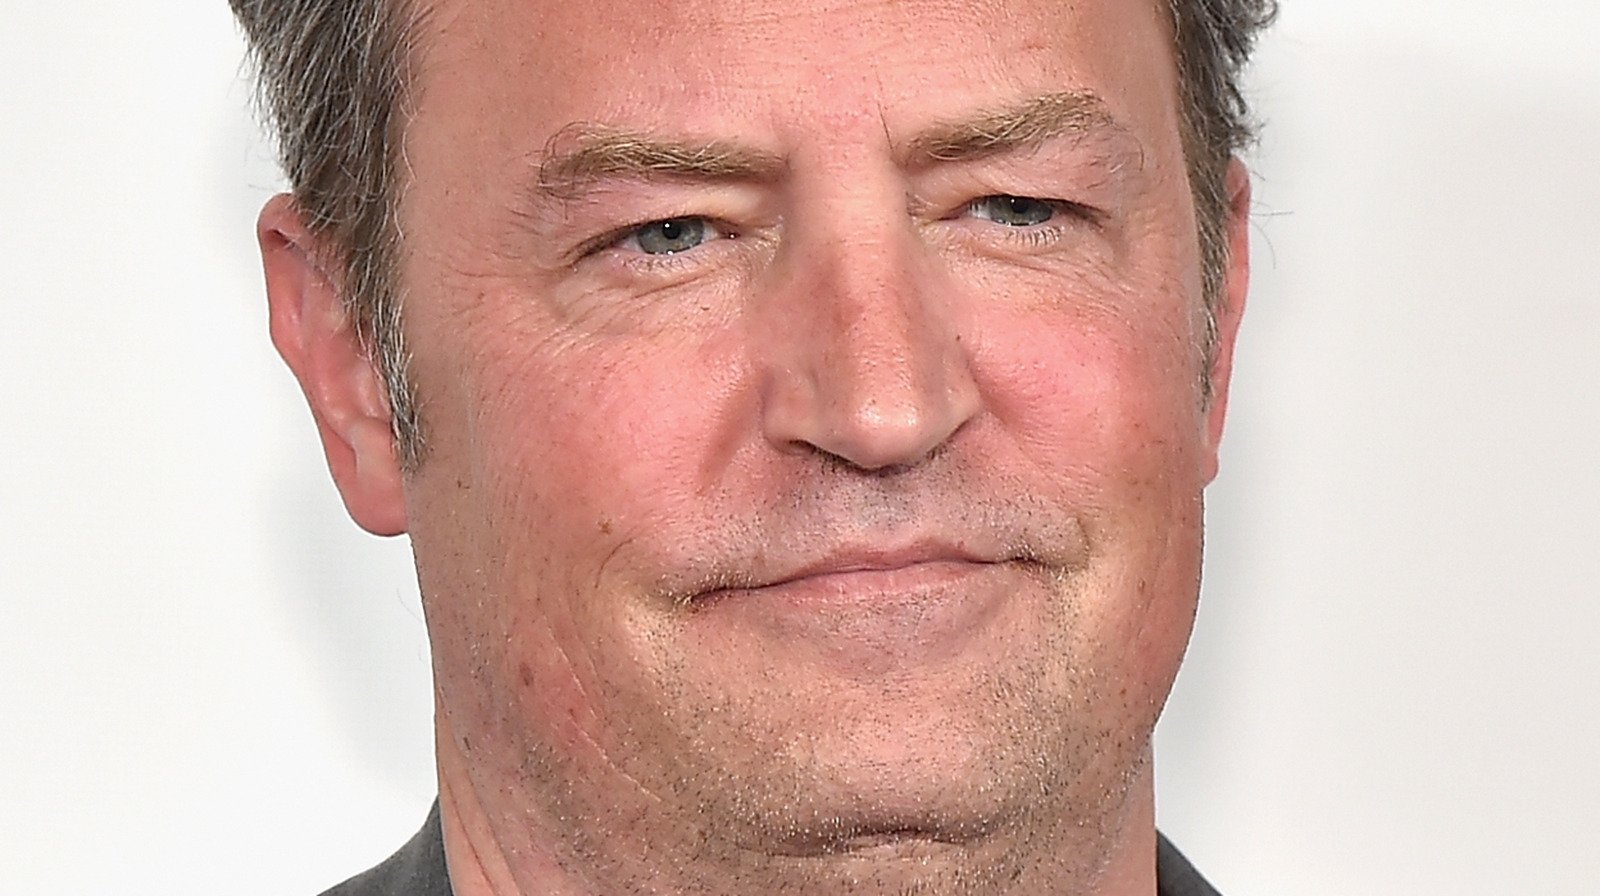 The Real Reason Matthew Perry Slurred His Words During The Friends Reunion Trailer